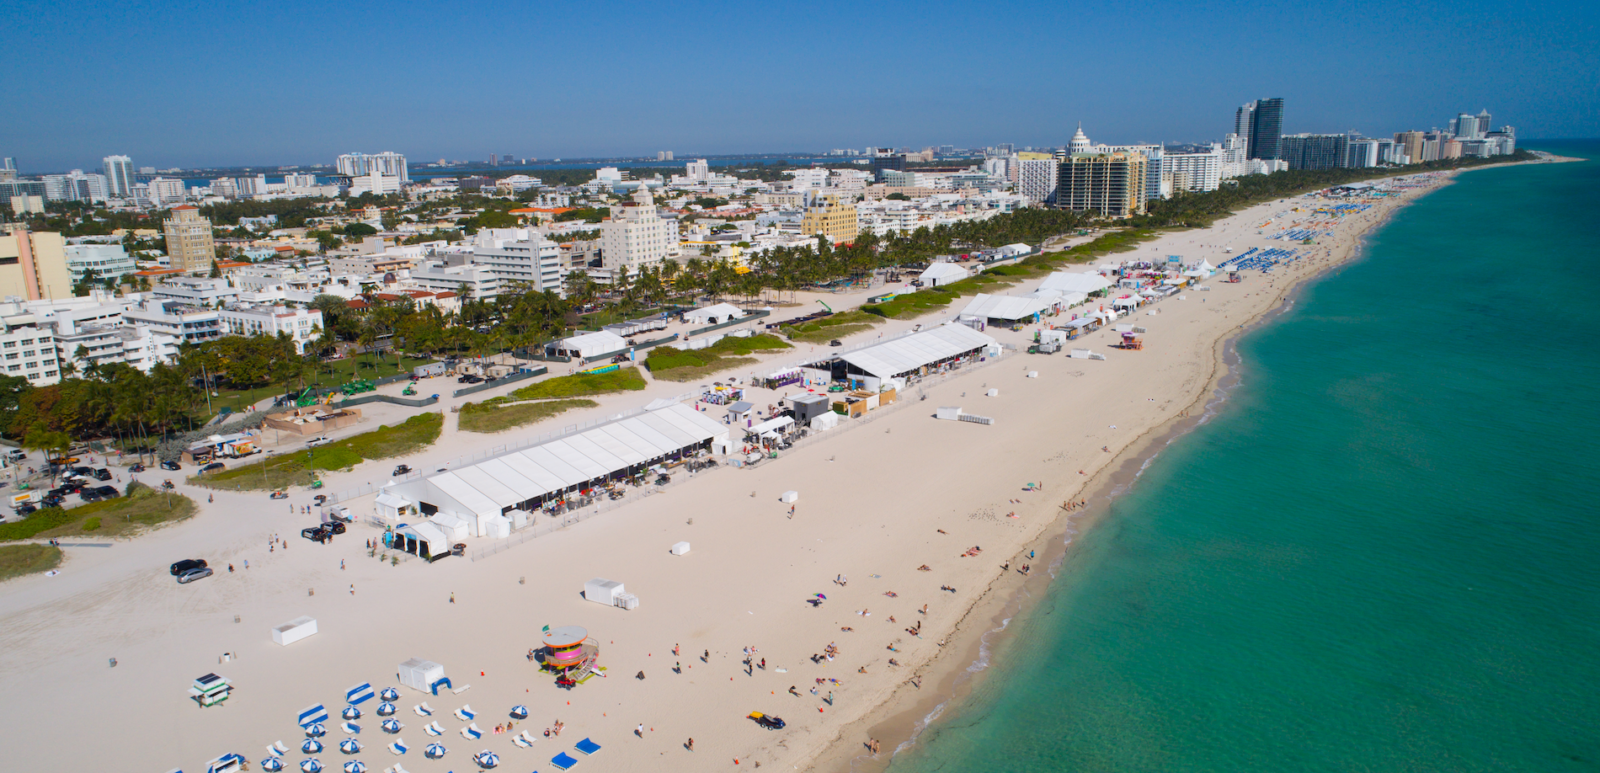 Aerial image of the annual South Beach Wine and Food Festival along Ocean Drive